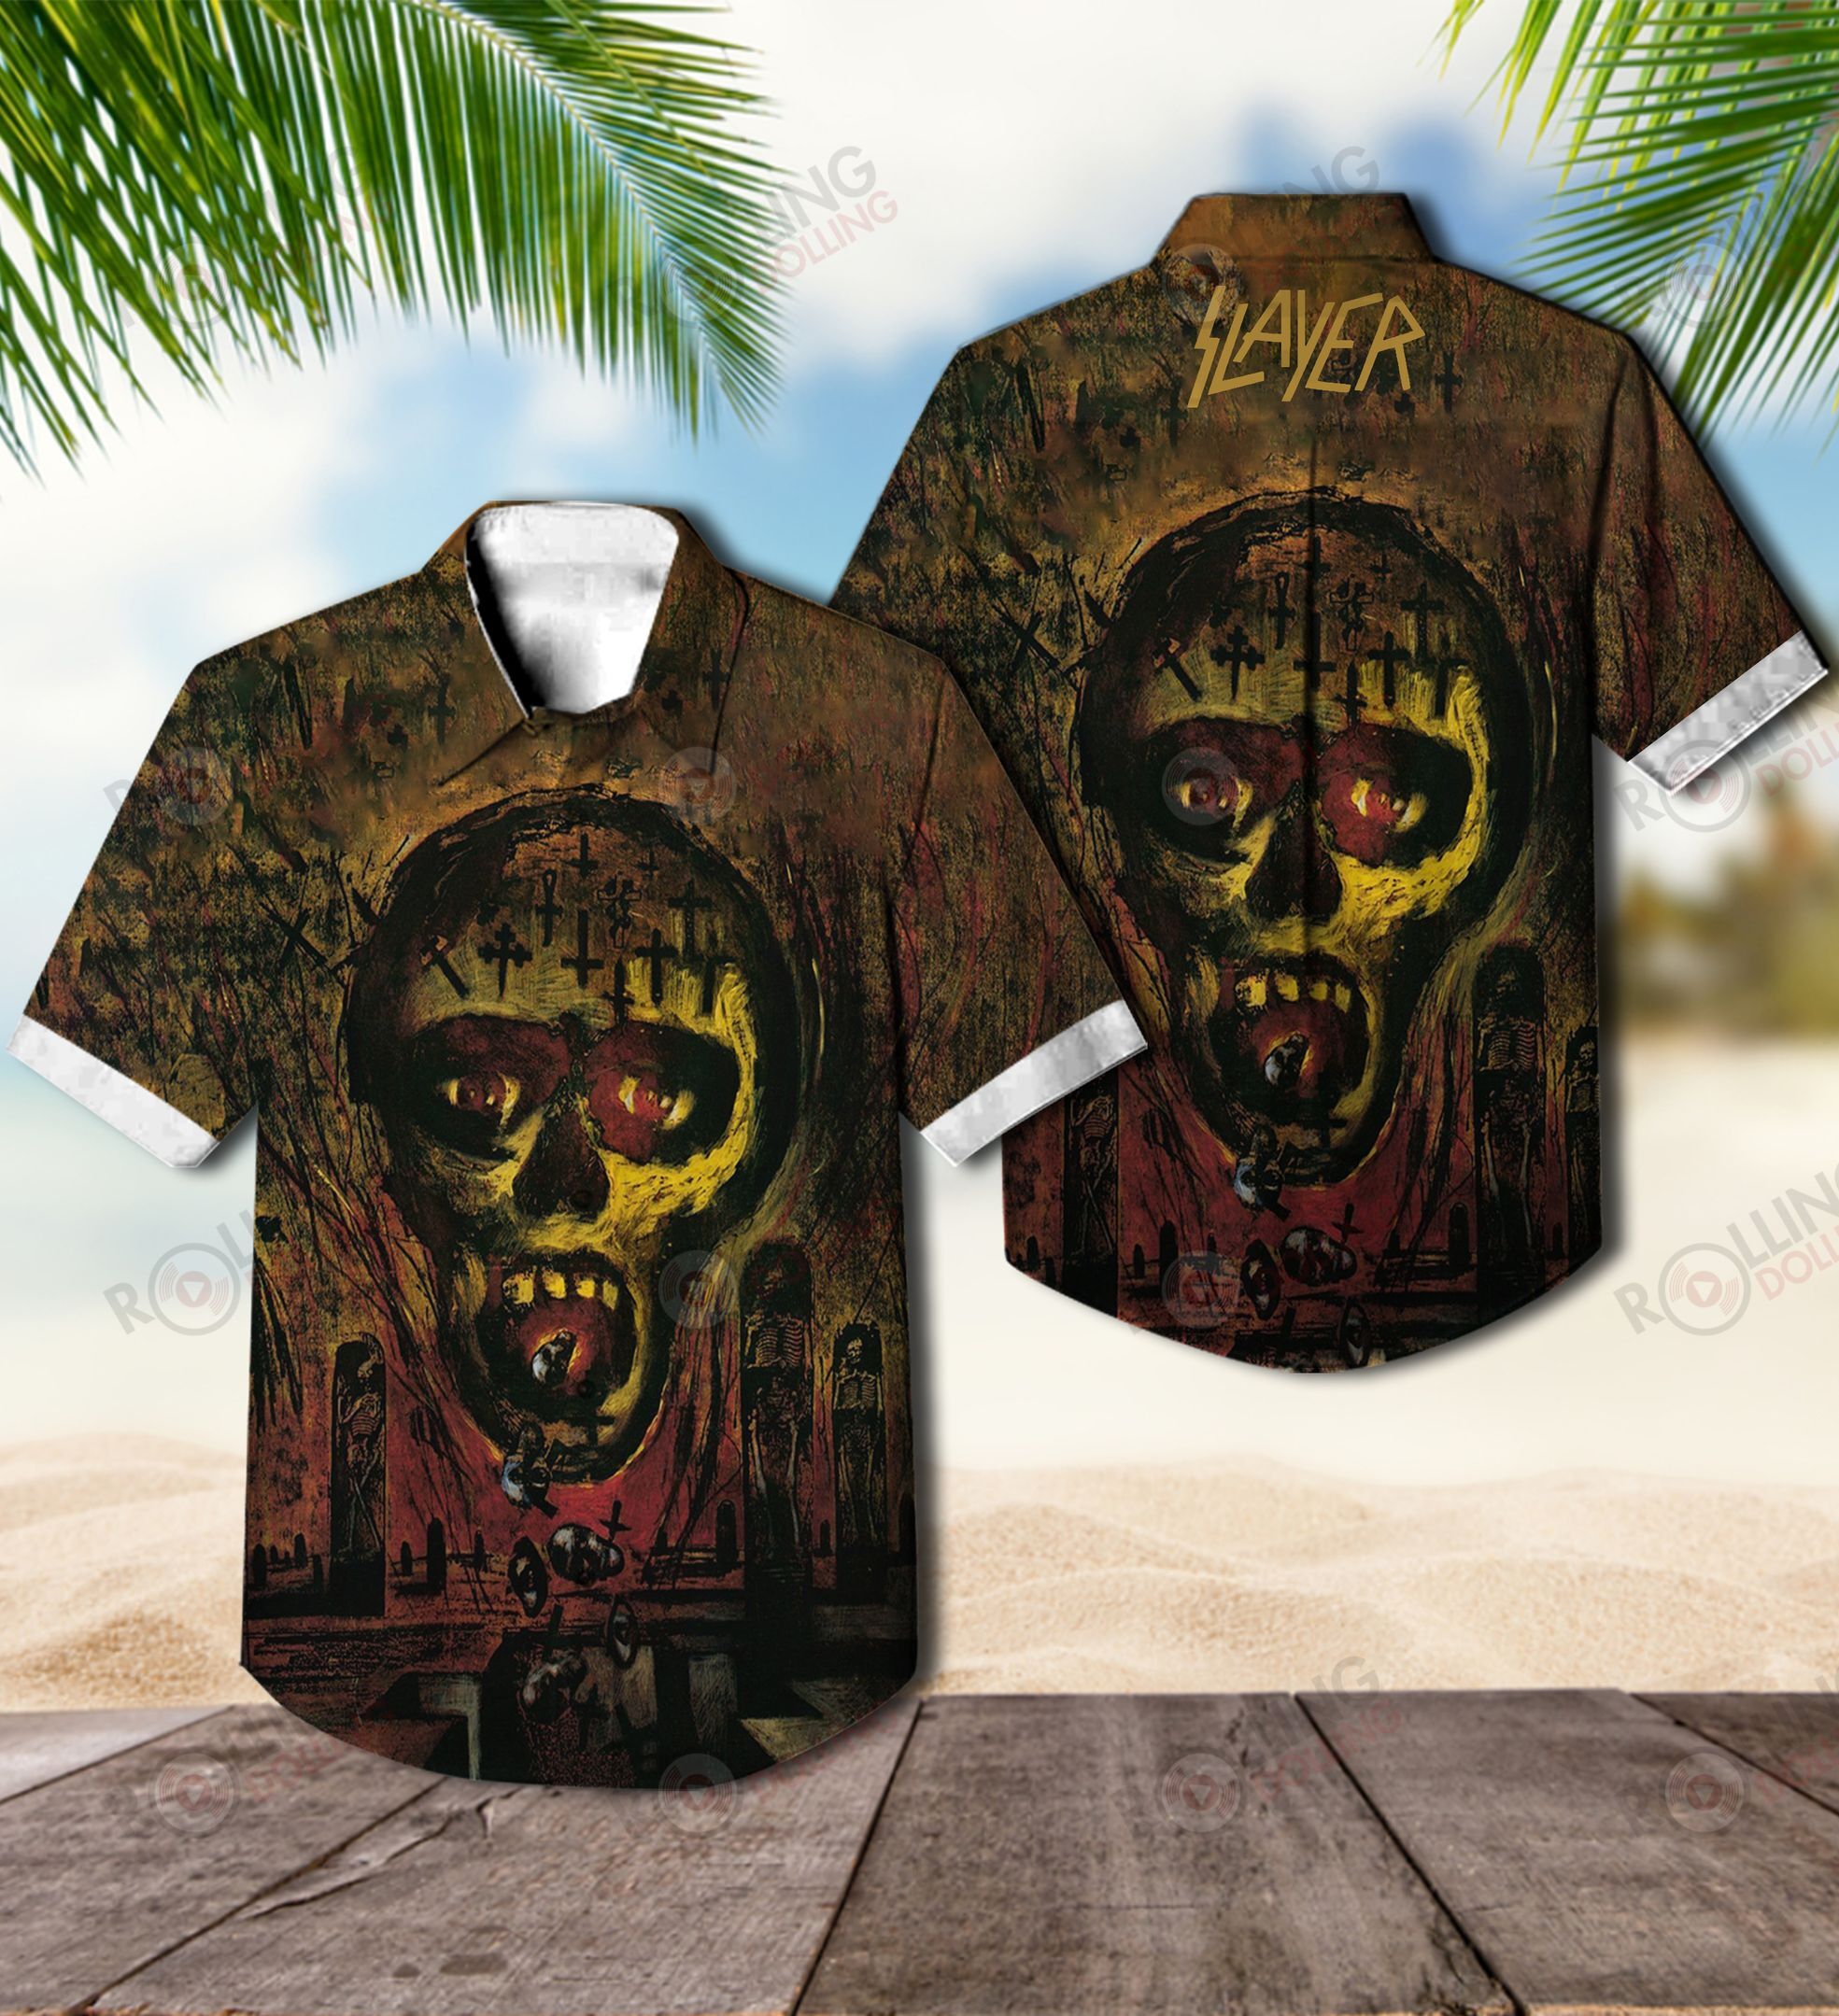 For summer, consider wearing This Amazing Hawaiian Shirt shirt in our store 136